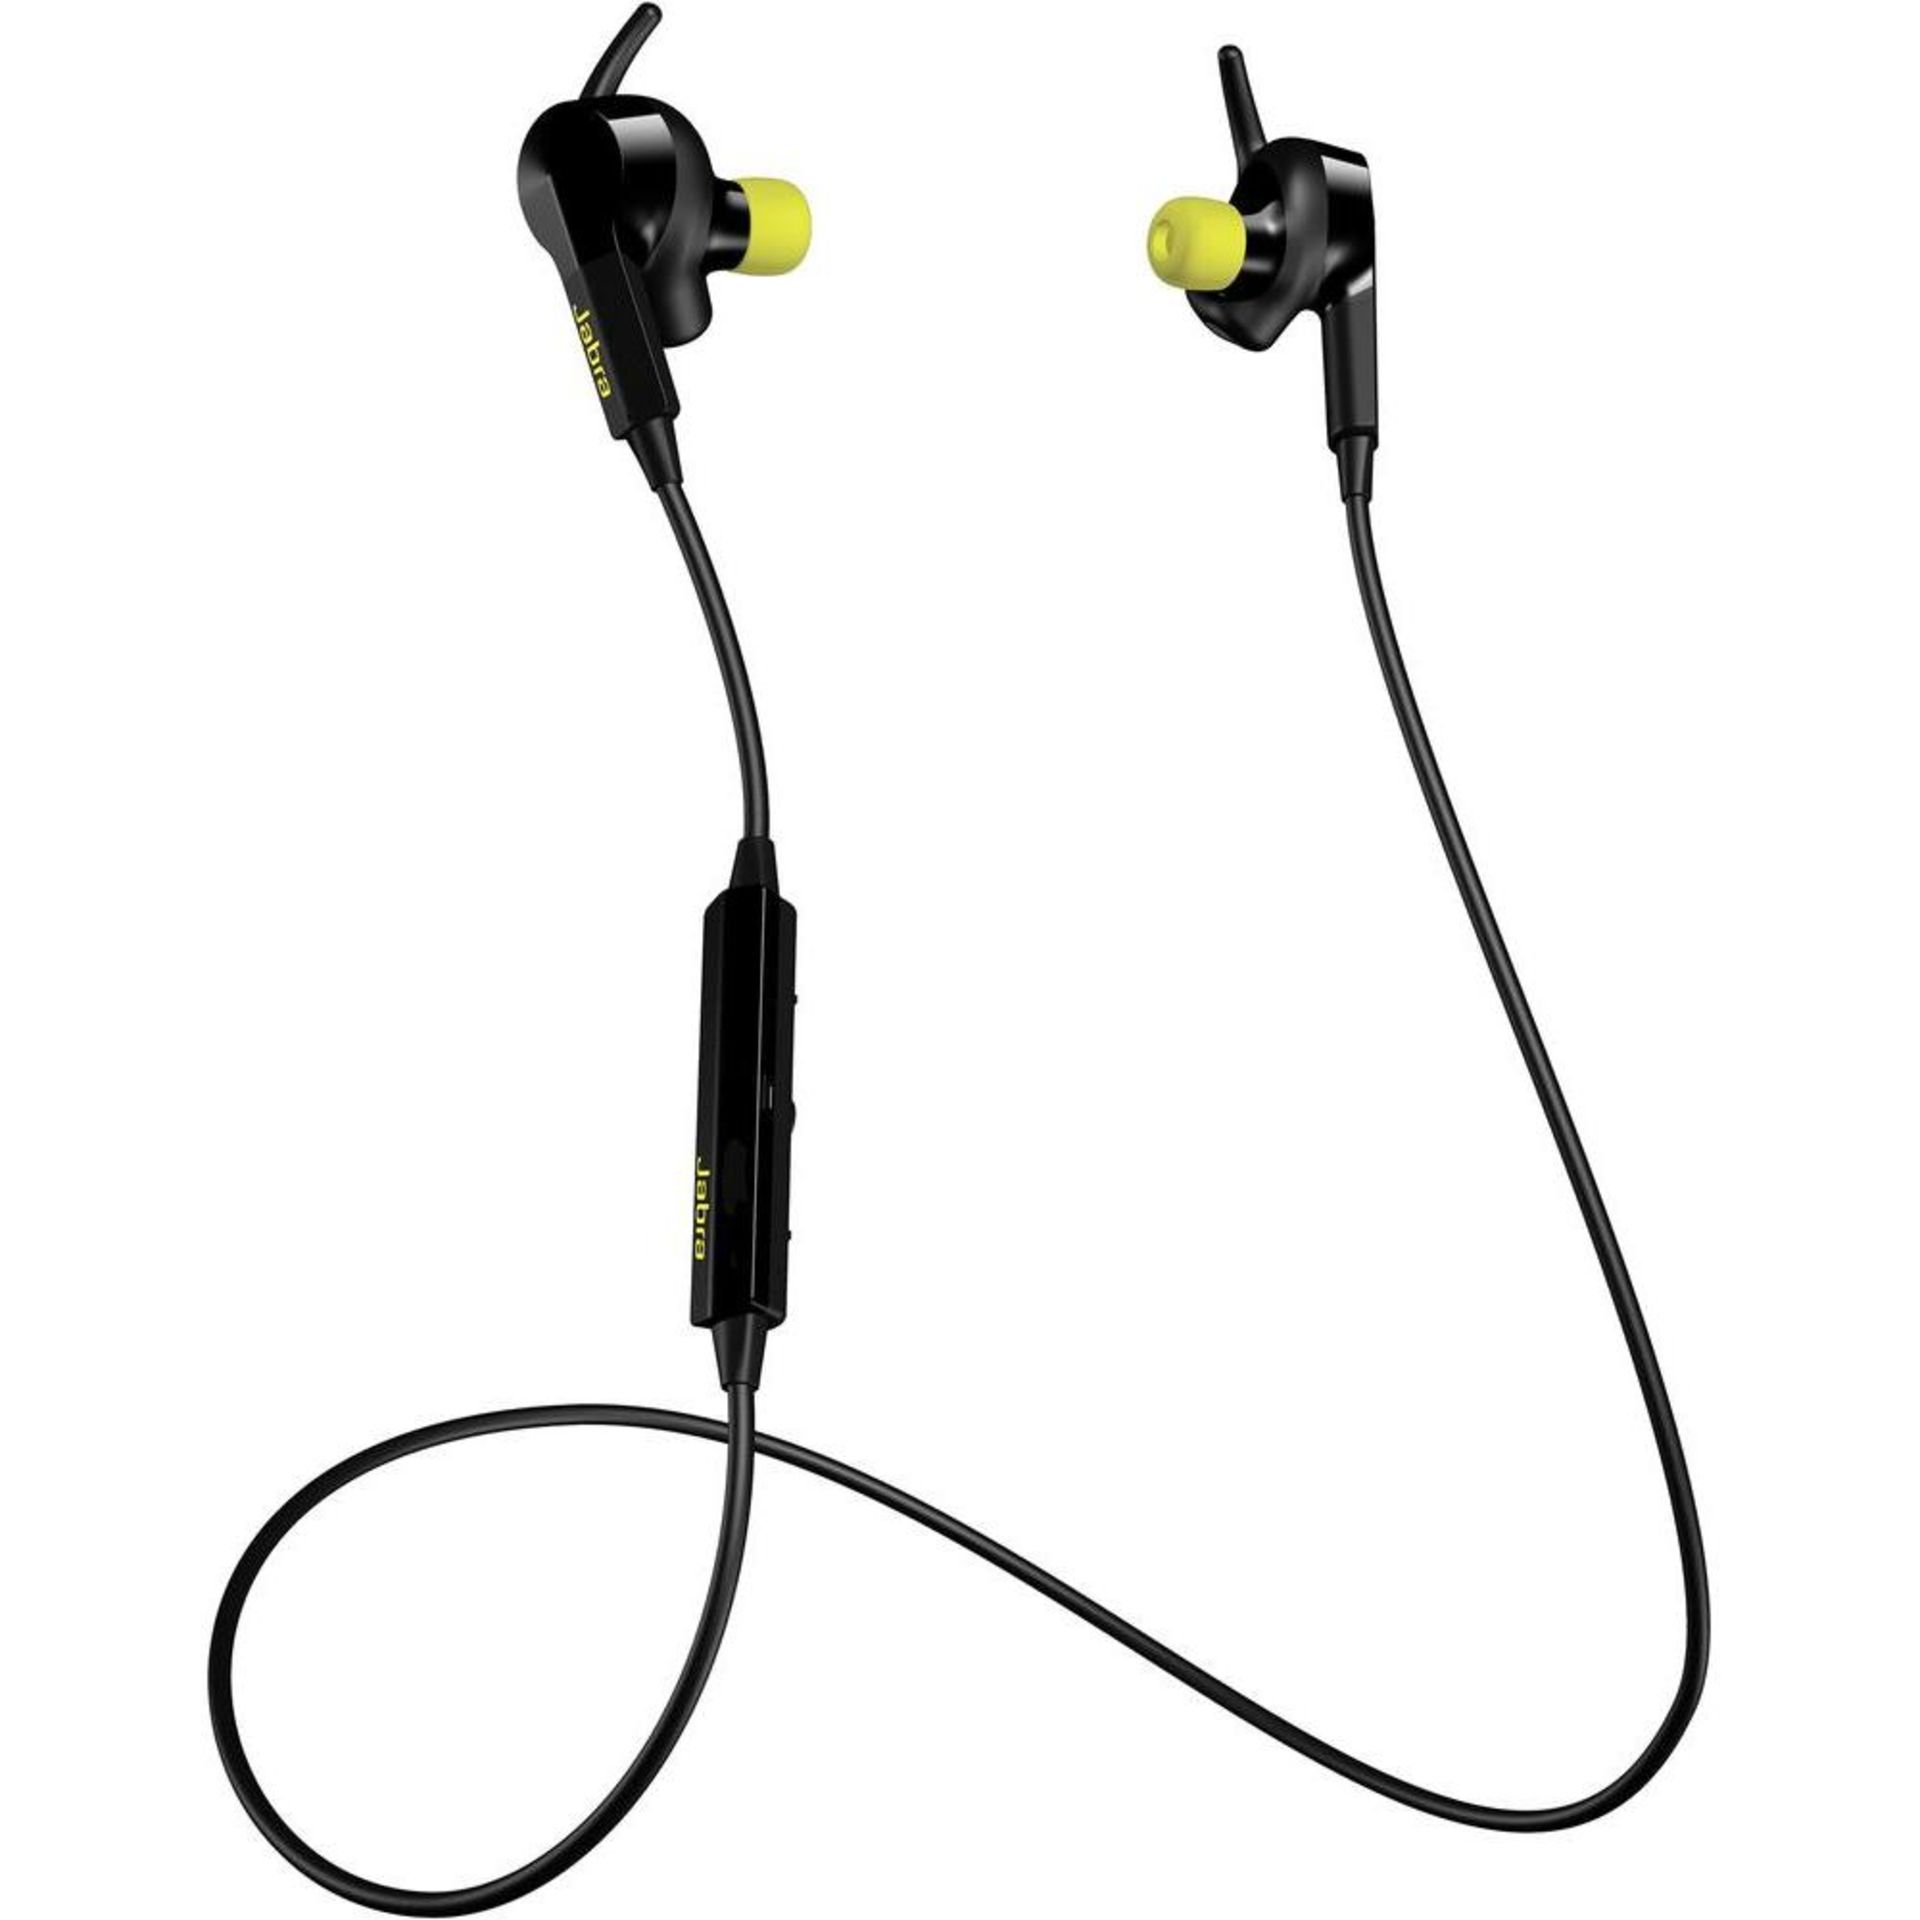 V Brand New Jabra Sport Pulse Wireless In Ear Headphones With Built In Heart Monitor (US Military